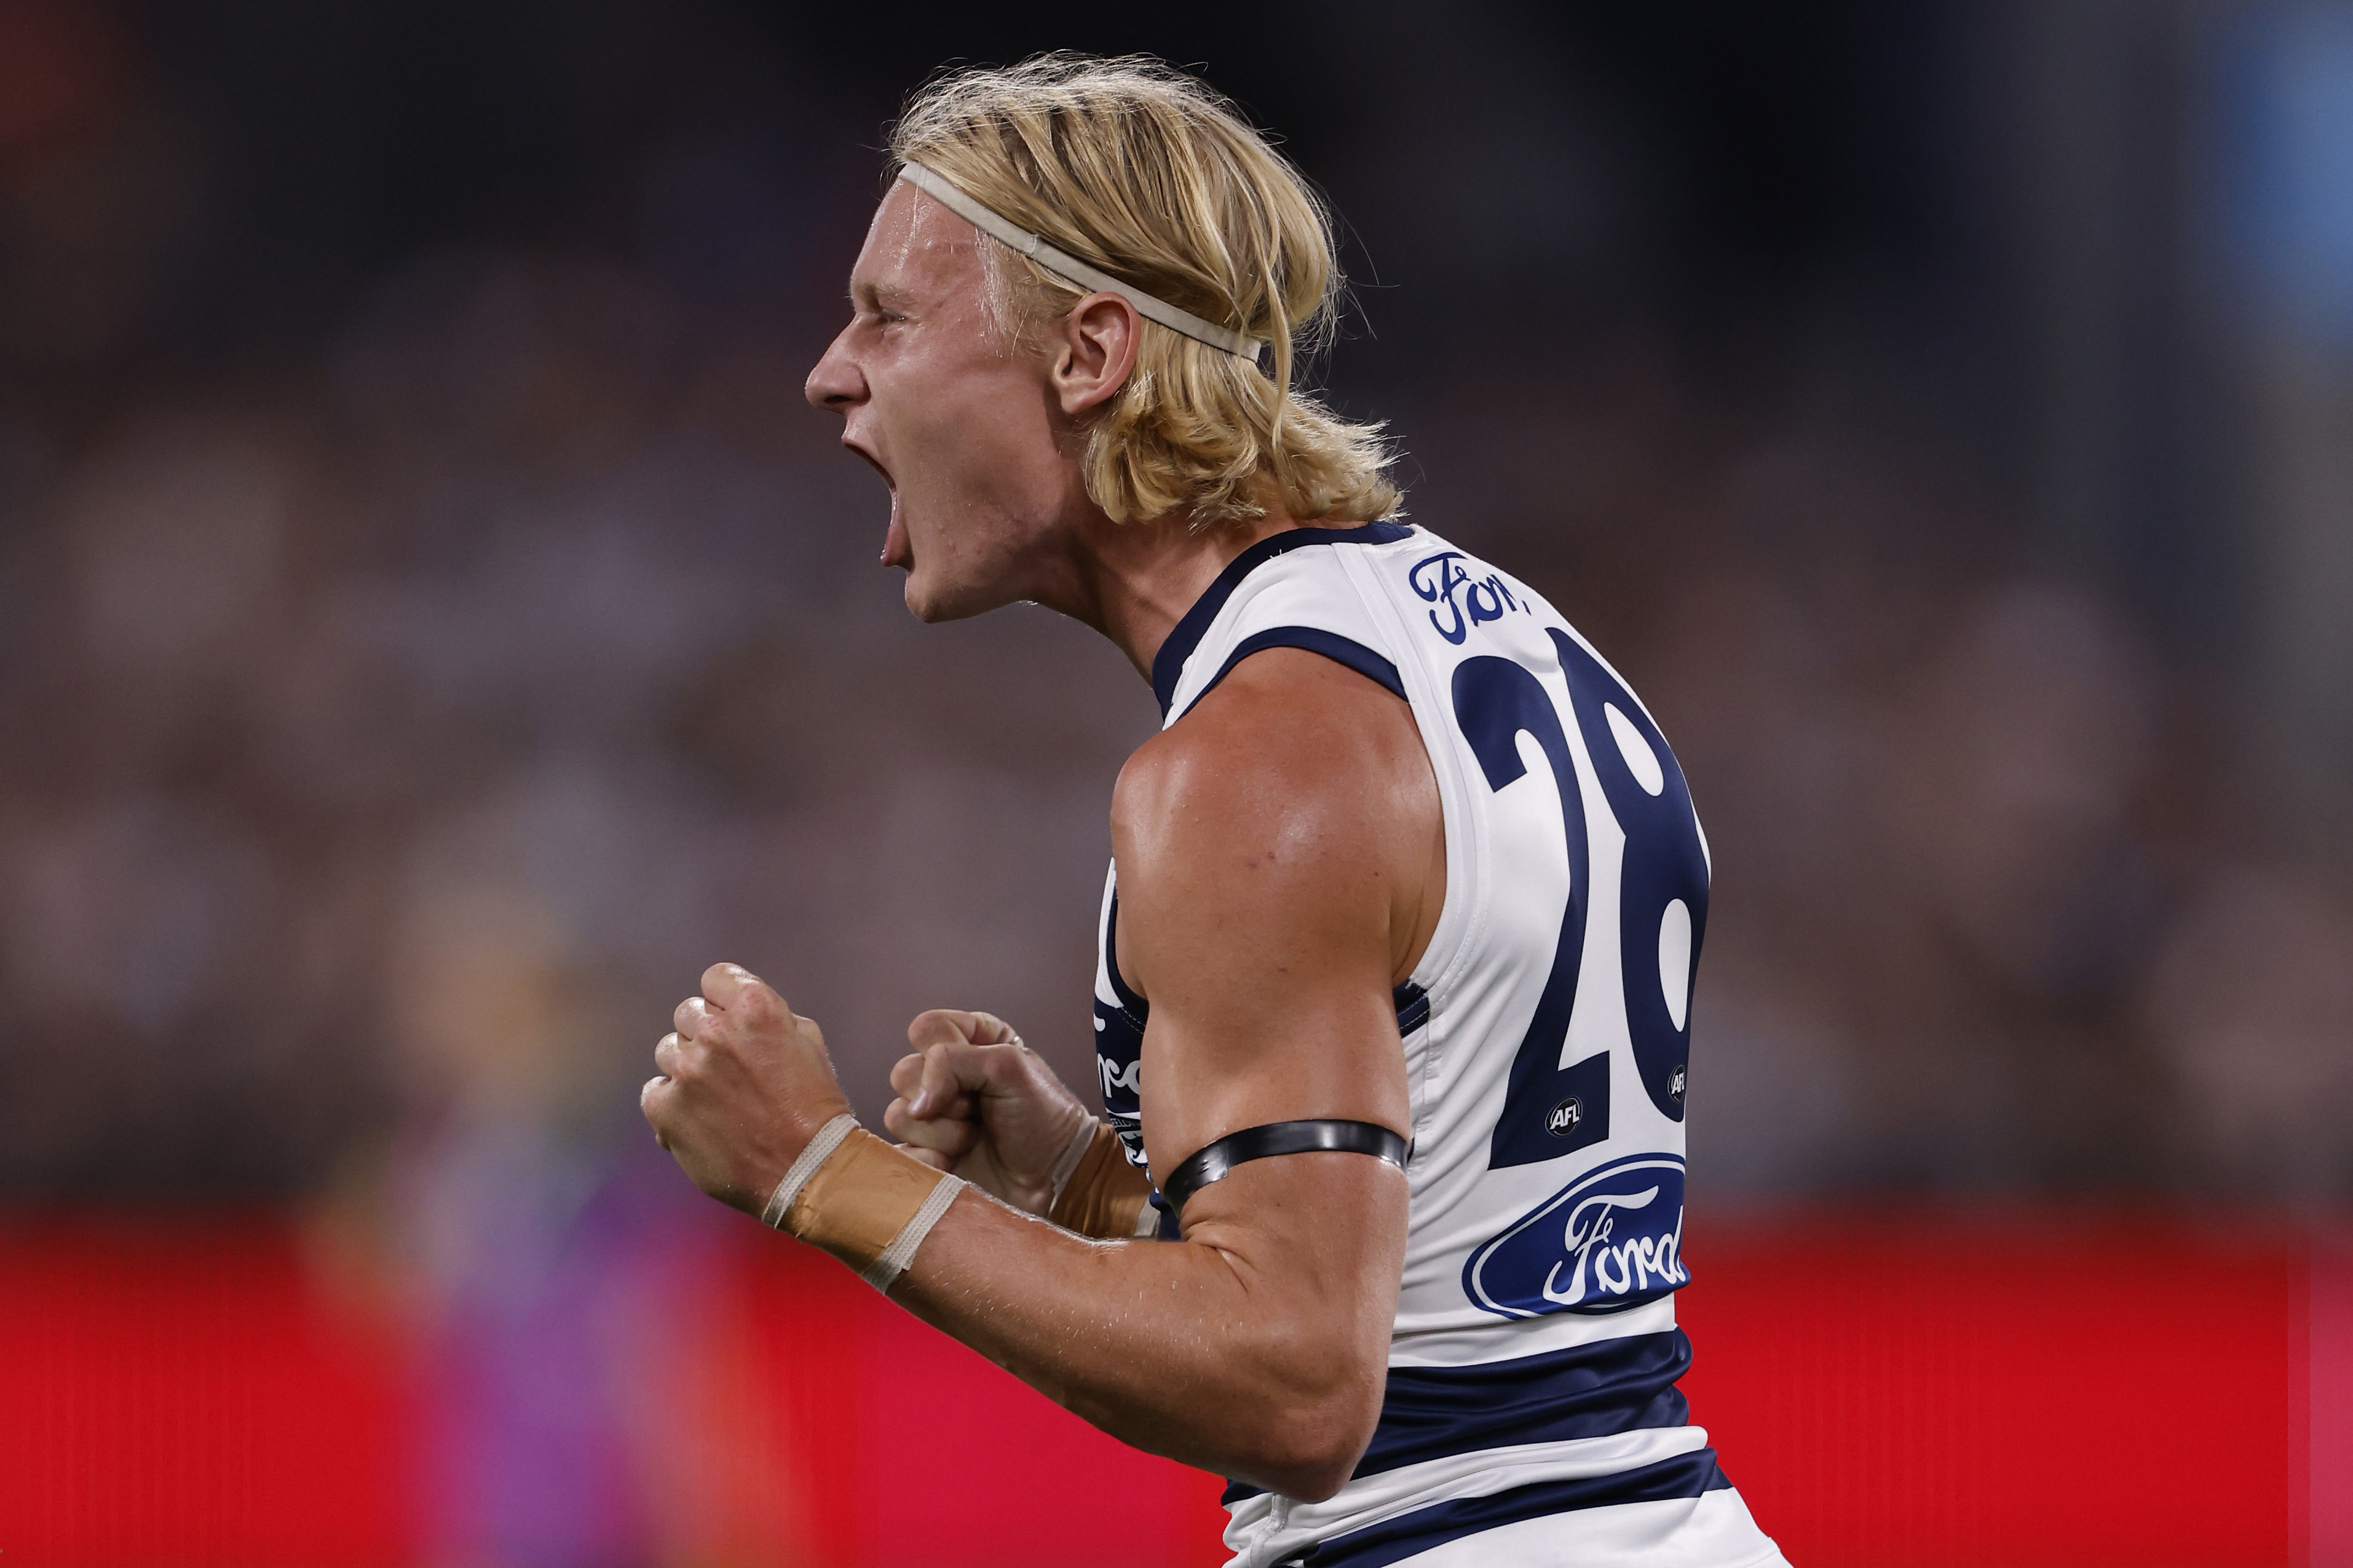 Ollie Dempsey was electric in Geelong's win.